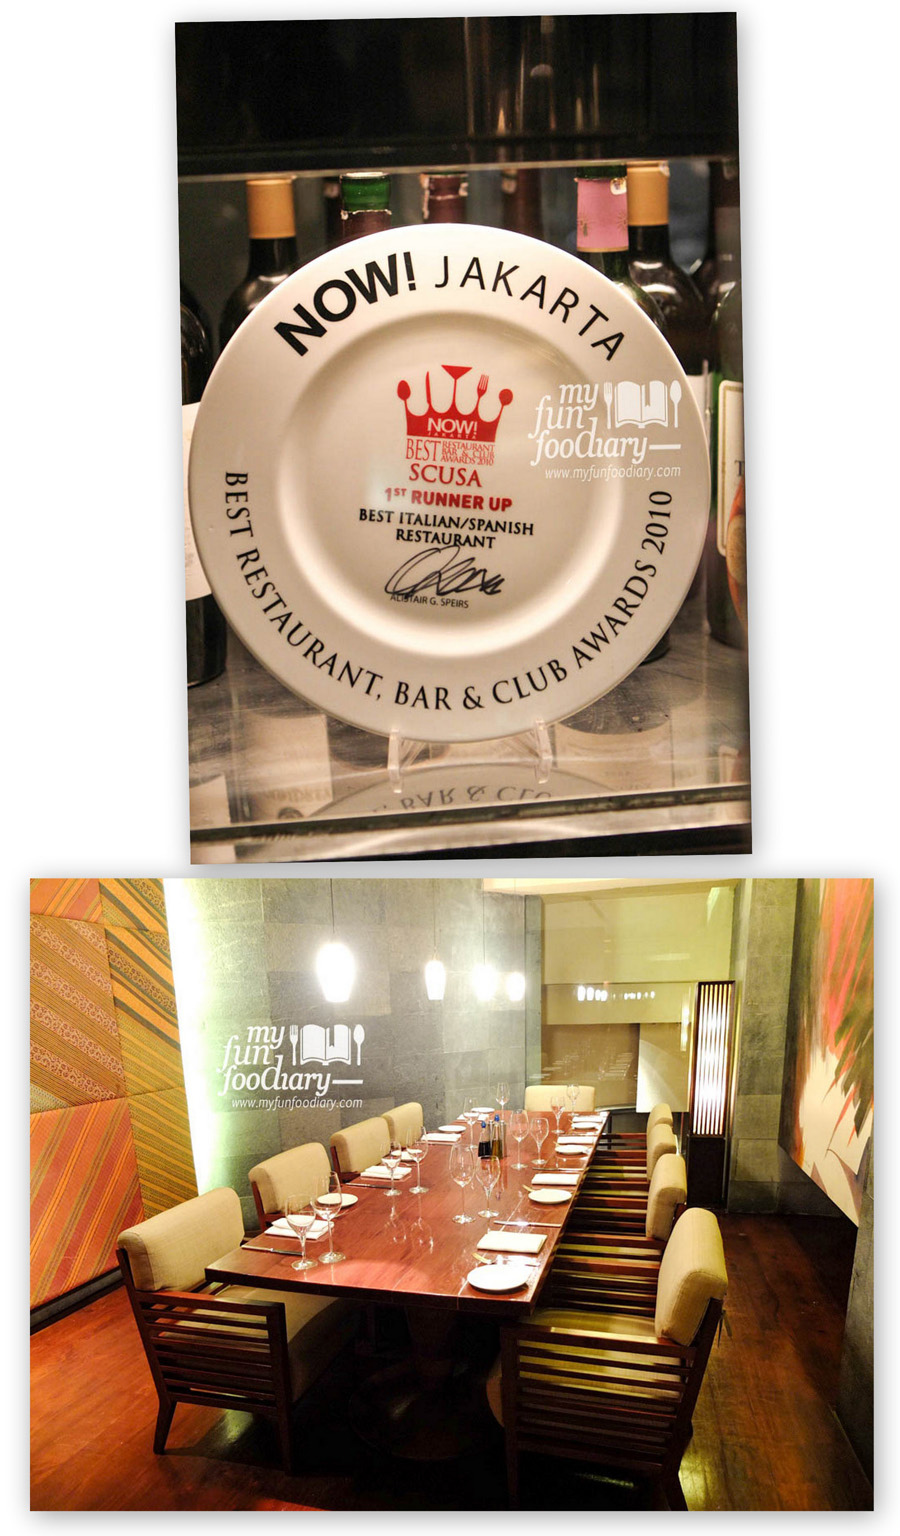 Award and Private Room at Scusa